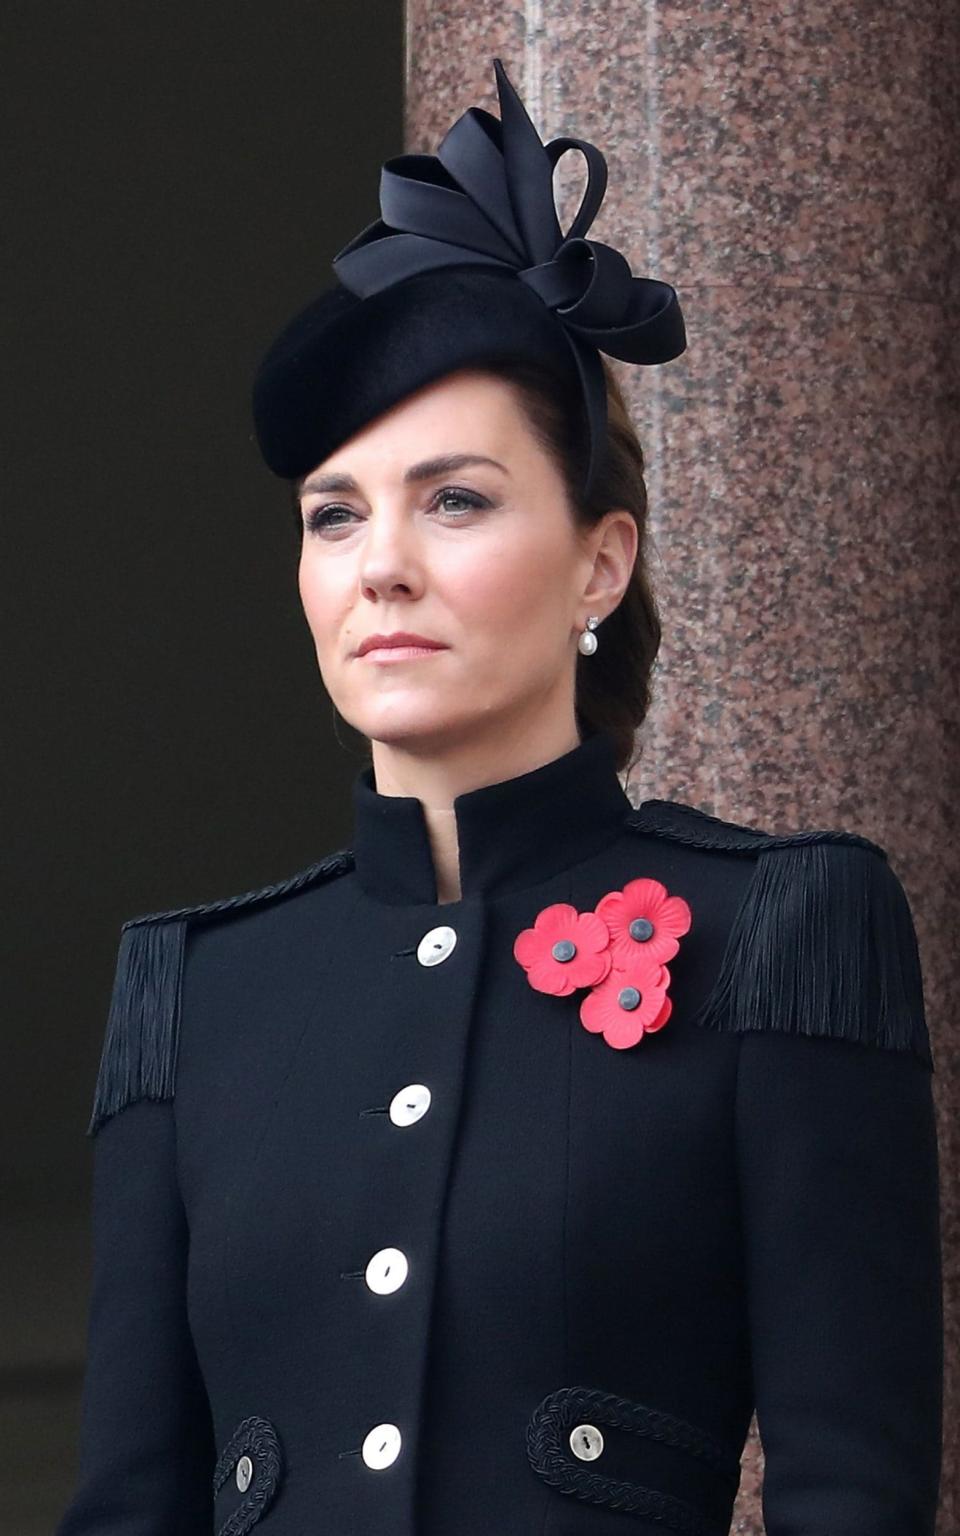 The Duchess of Cambridge alexander mcqueen Service of Remembrance - Getty Images